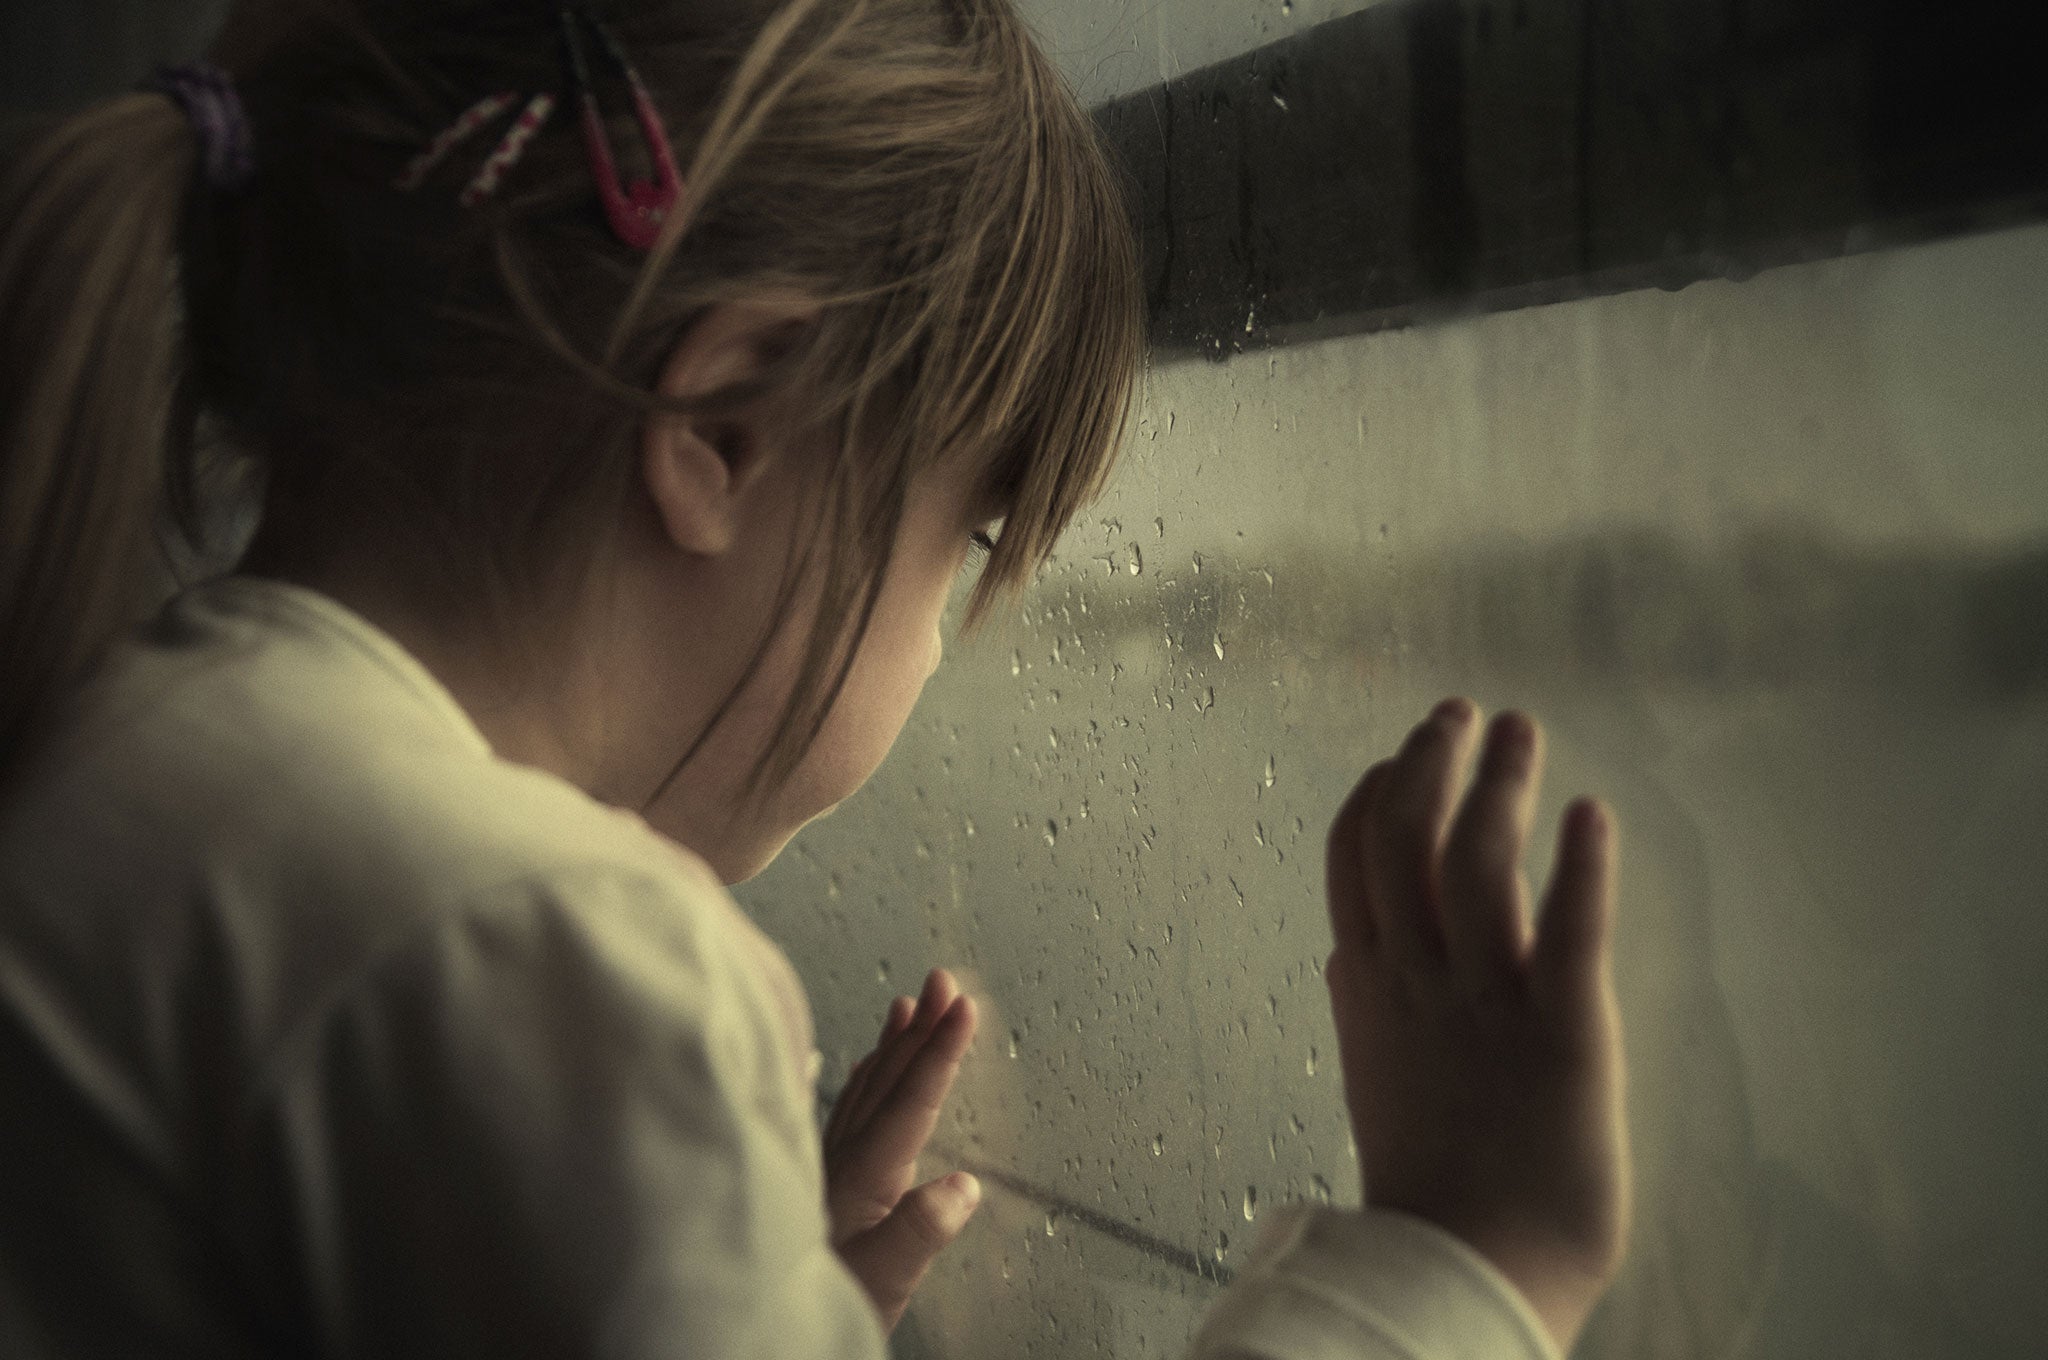 At least 1,400 children were sexually abused in Rotherham between 1997 and 2013